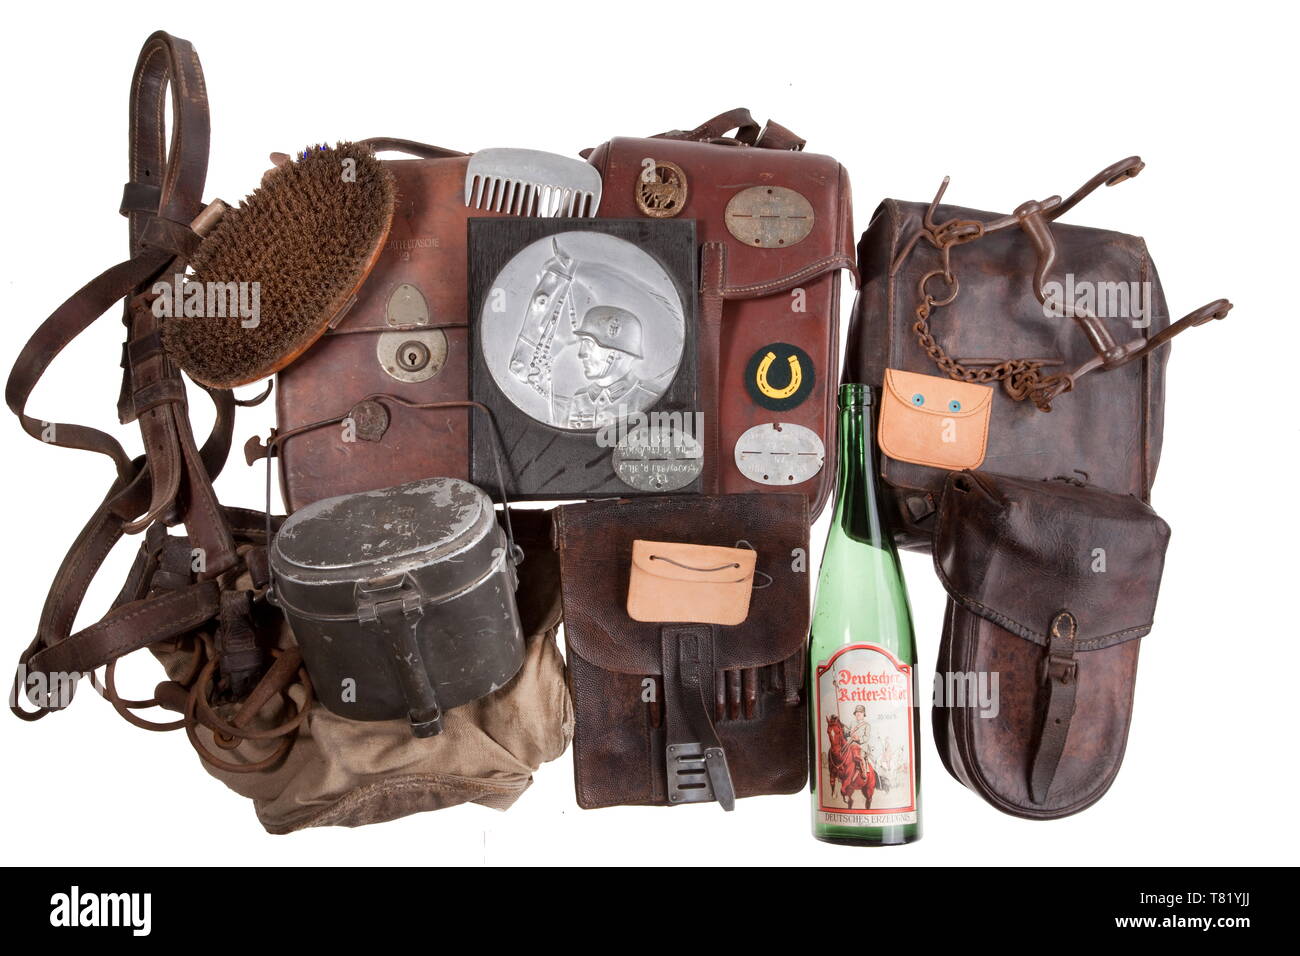 Cavalry accessories, equipment. Veterinary saddle bag M 29 of brown leather, with manufacturer's mark 'Hauptner' and other stampings. Also a saddle bag M 34 stamped 'J. M. Eckart, Ulm 1939' and 'GA'. Also included is a map-case M 35, a further map-case with accessories, a blacksmith's bag with files, a canvas feeding trough, a horse brush, three identity discs for cavalry, a Youth Sports Badge for Riding, a patch for horseshoeing personnel, a bridle with bit, a Driver's Badge (post-war), a mural relief and other accessories. Not checked for compl, Additional-Rights-Clearance-Info-Not-Available Stock Photo